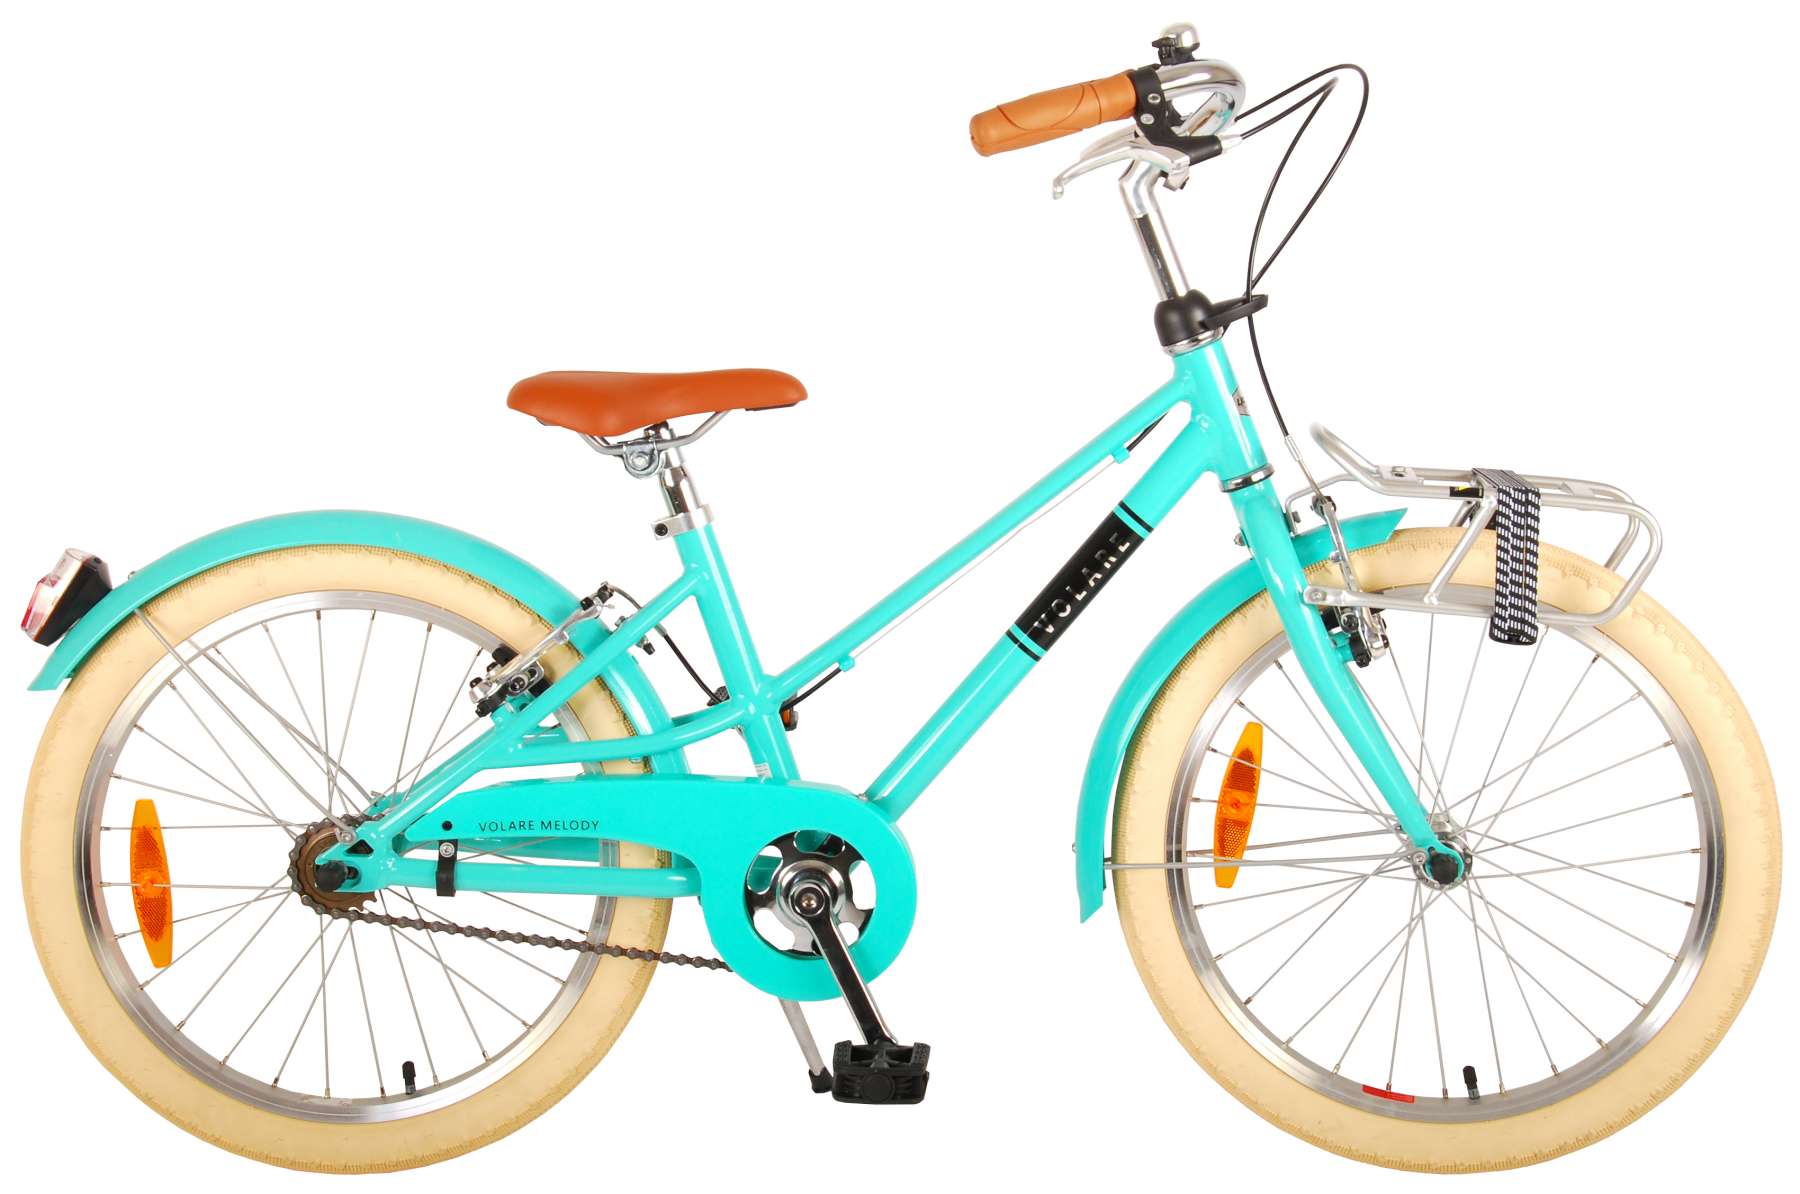 bestrating Vrijlating aluminium Volare Melody Children's bicycle - Girls - 20 inch - turquoise - two  handbrakes - Prime Collection